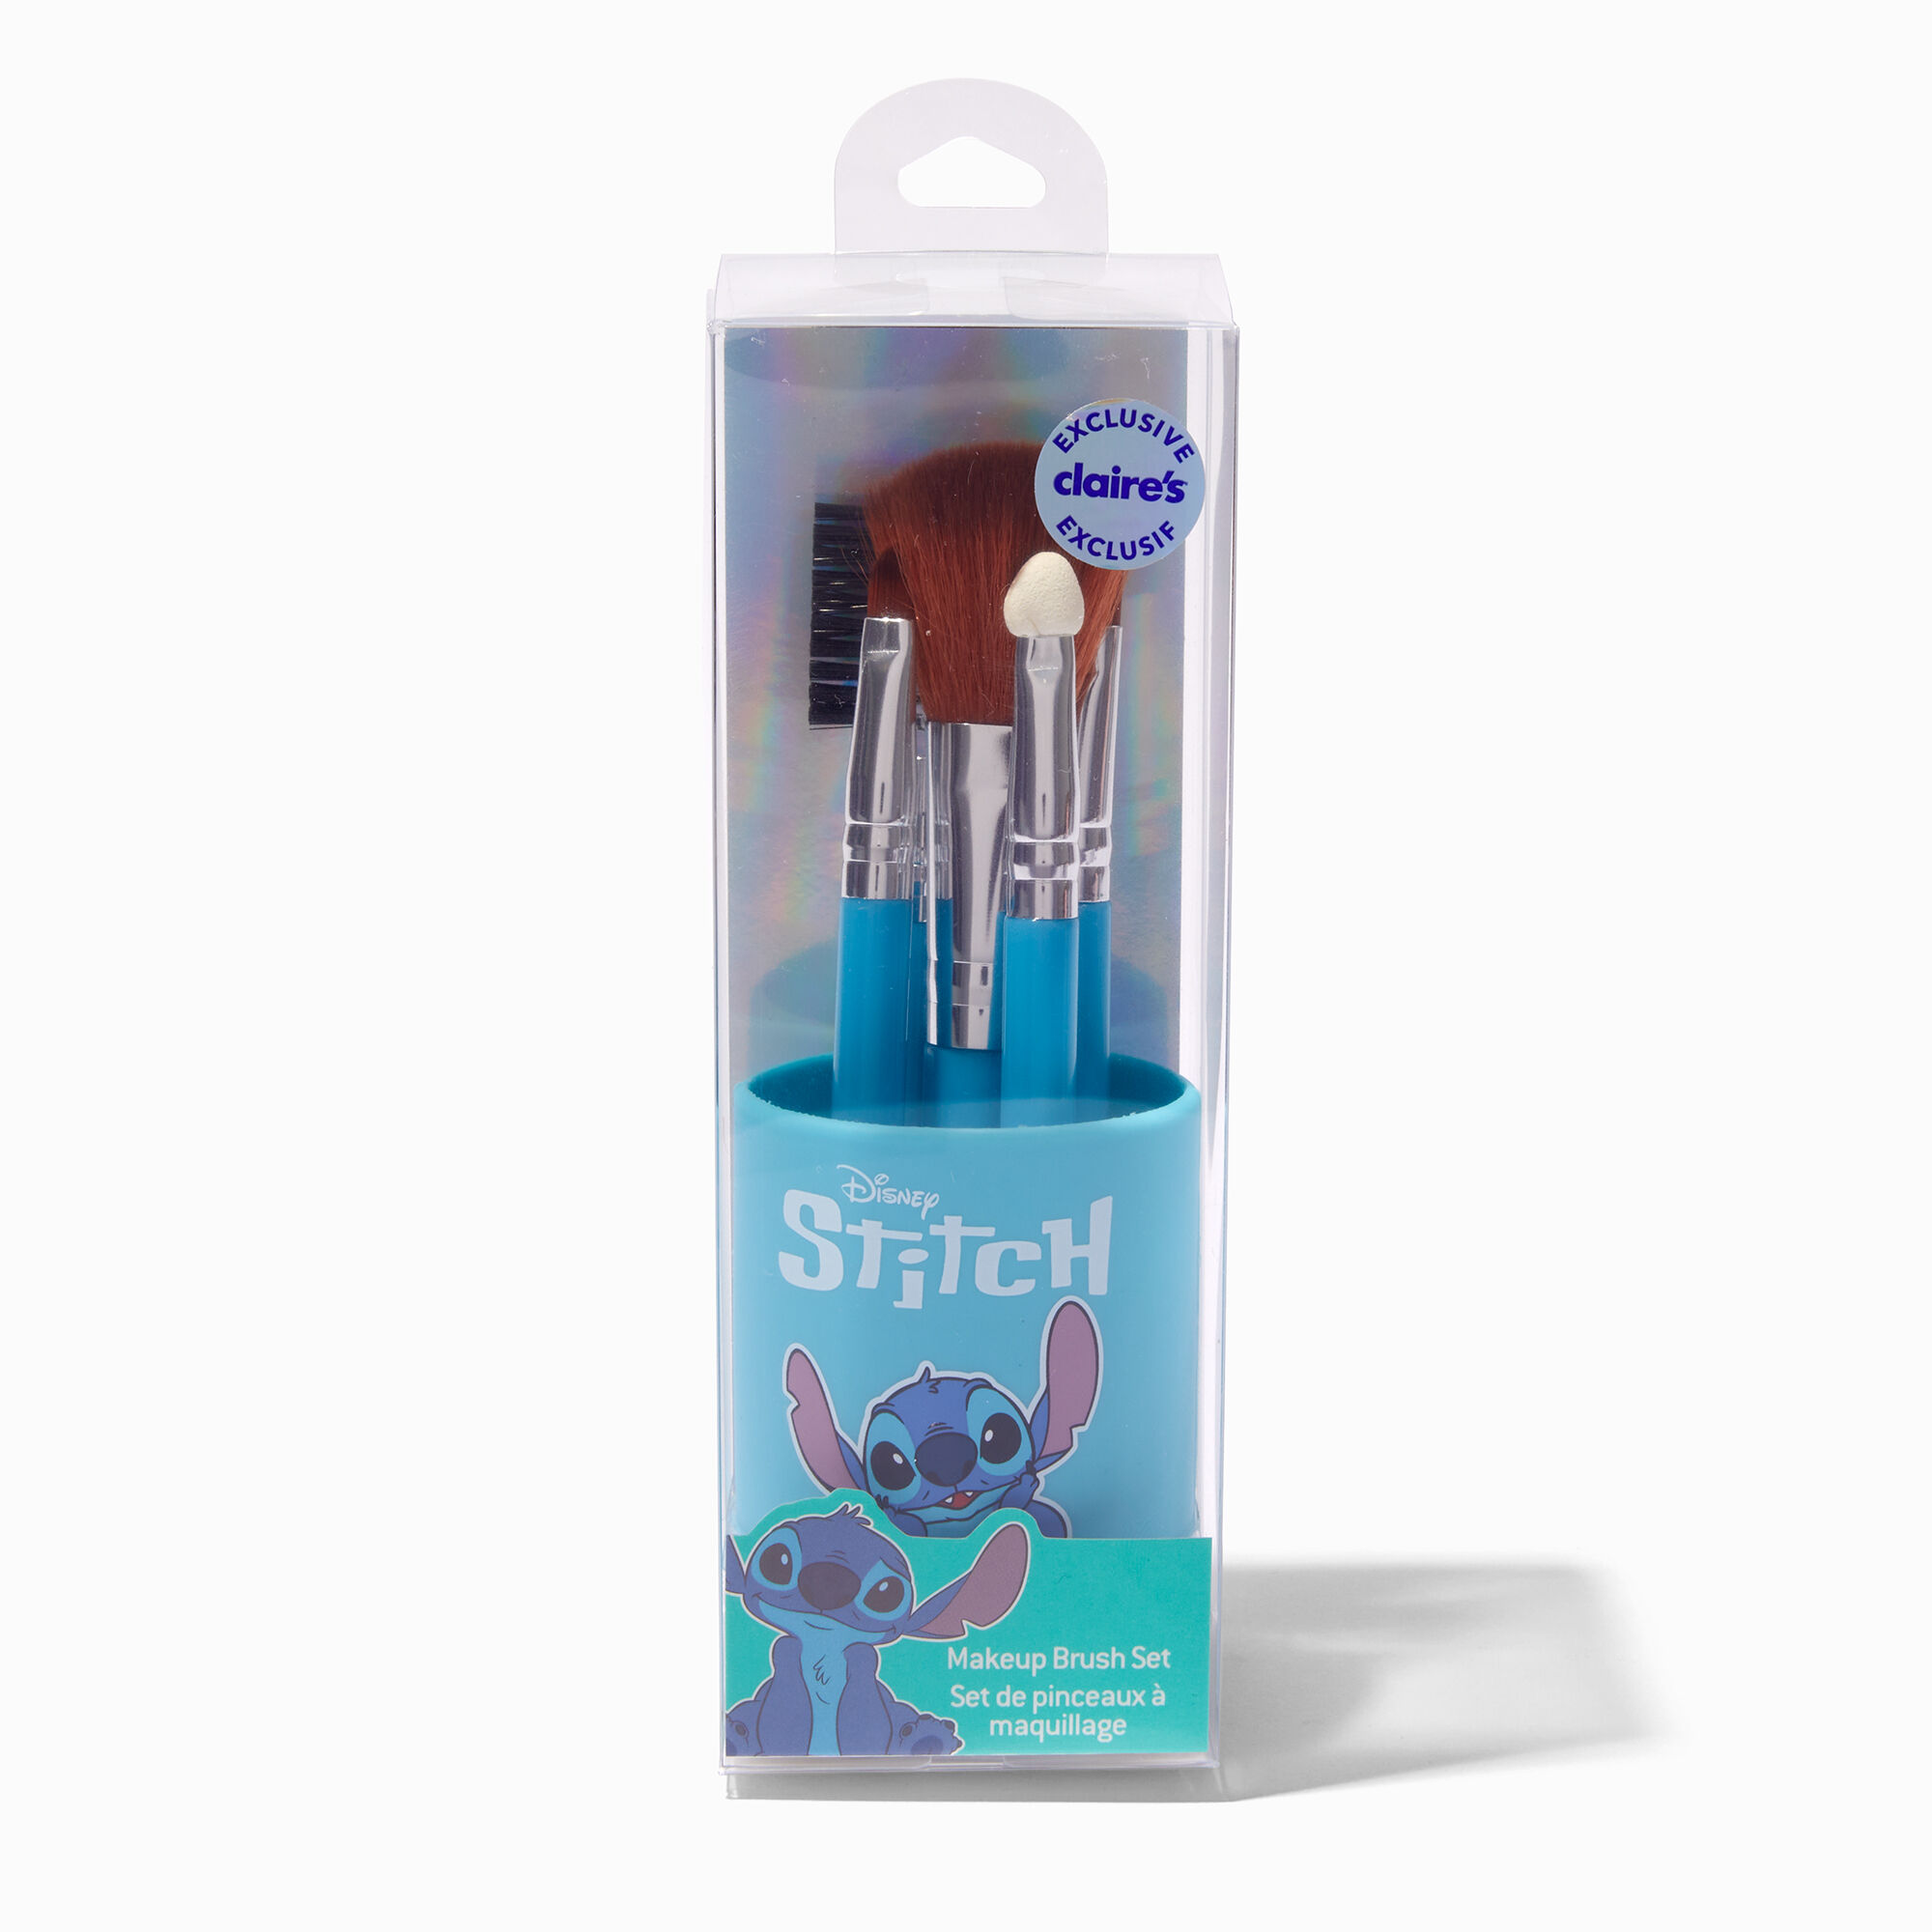 View Disney Stitch Claires Exclusive Makeup Brushes 5 Pack information